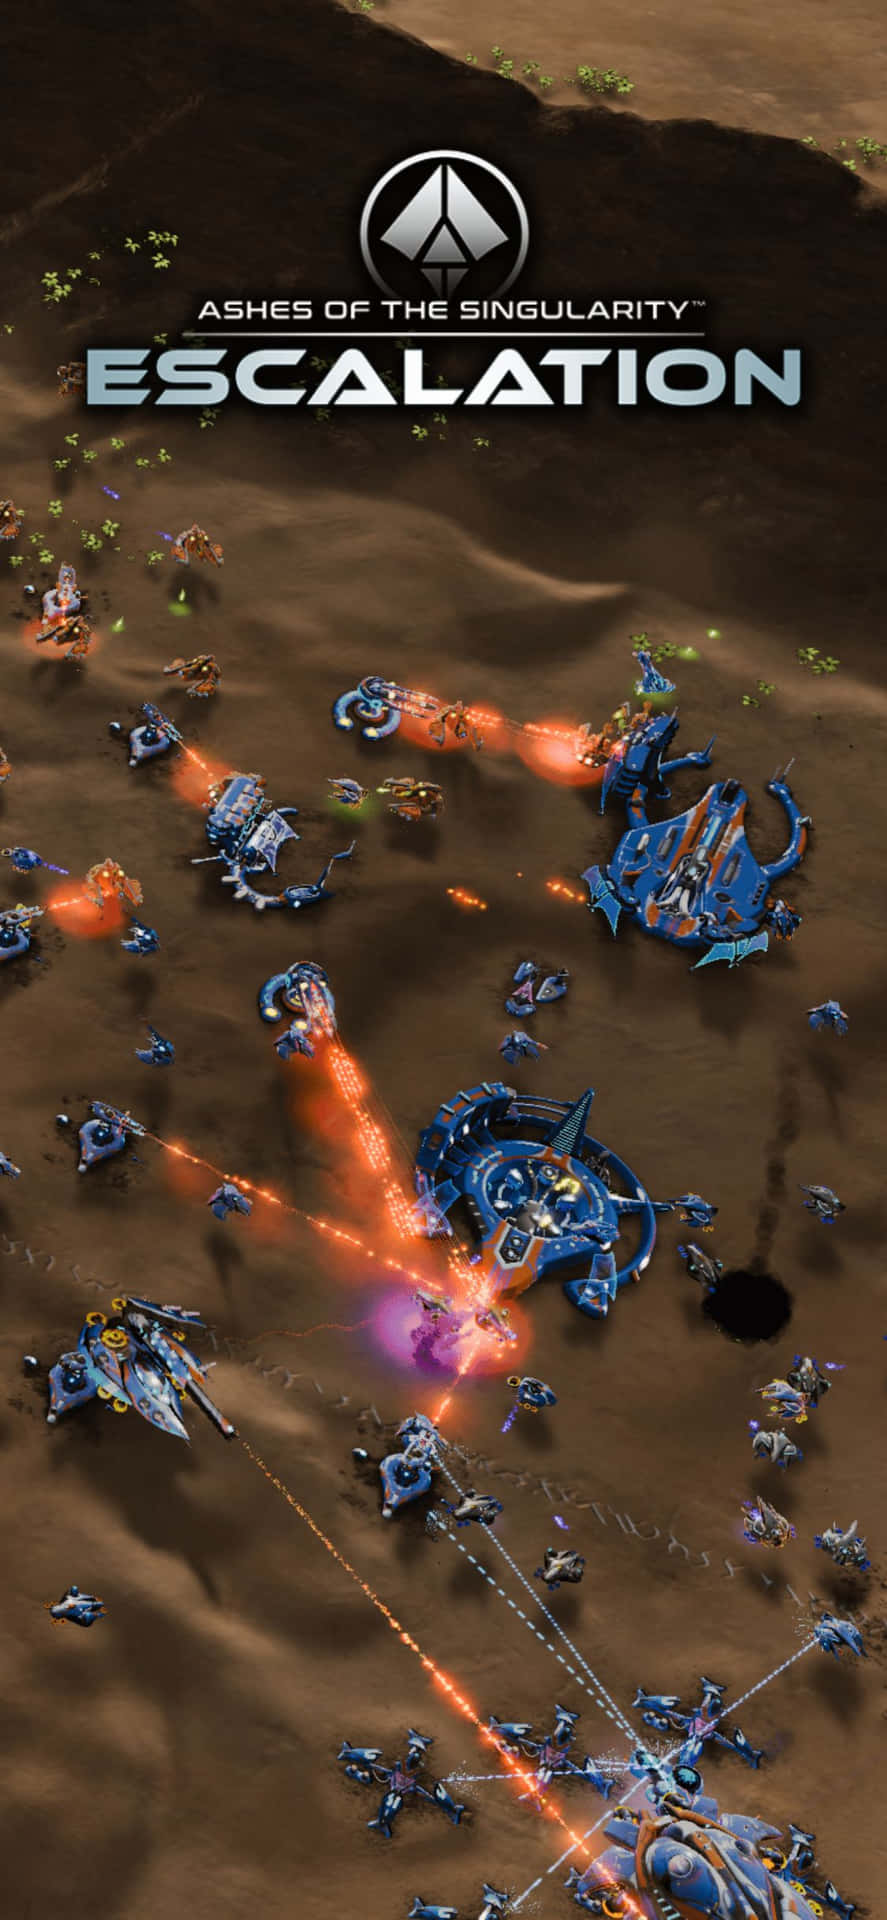 Battle in the Ashes of the Singularity: Escalation in Iphone X